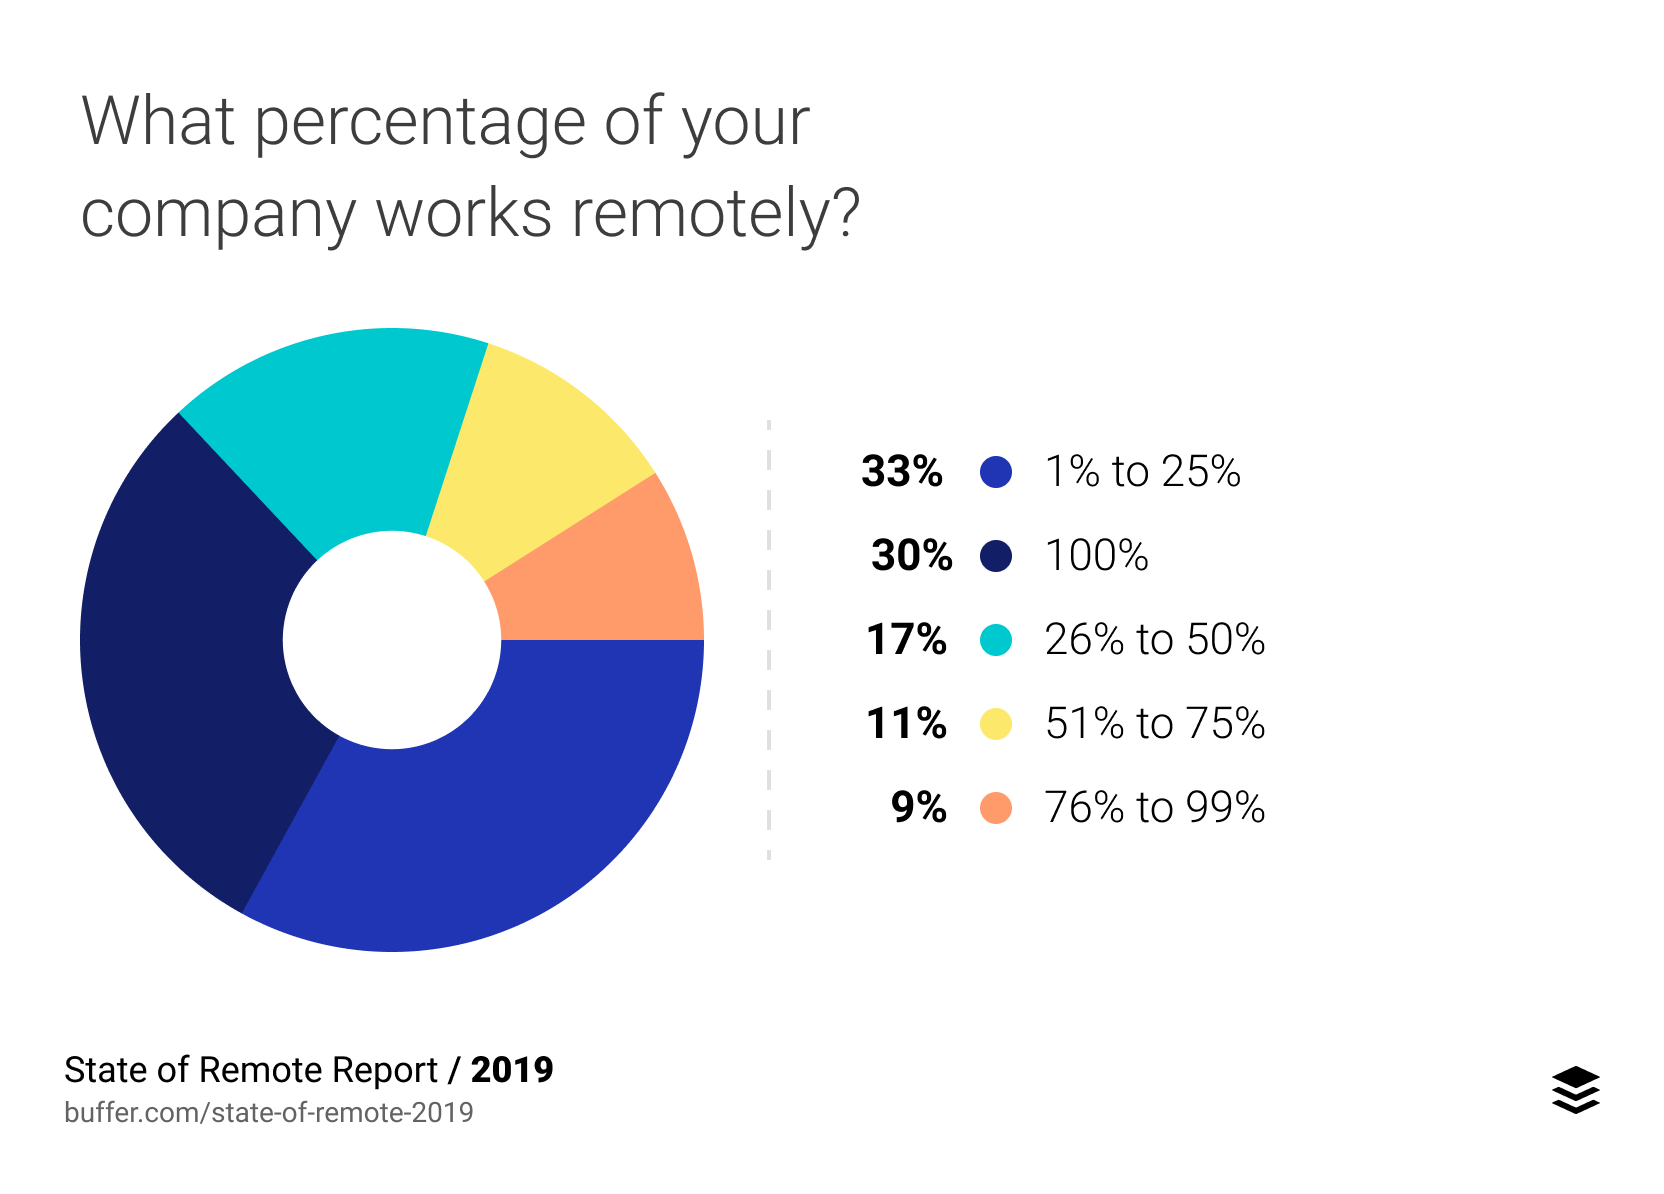 What percentage of your company works remotely?